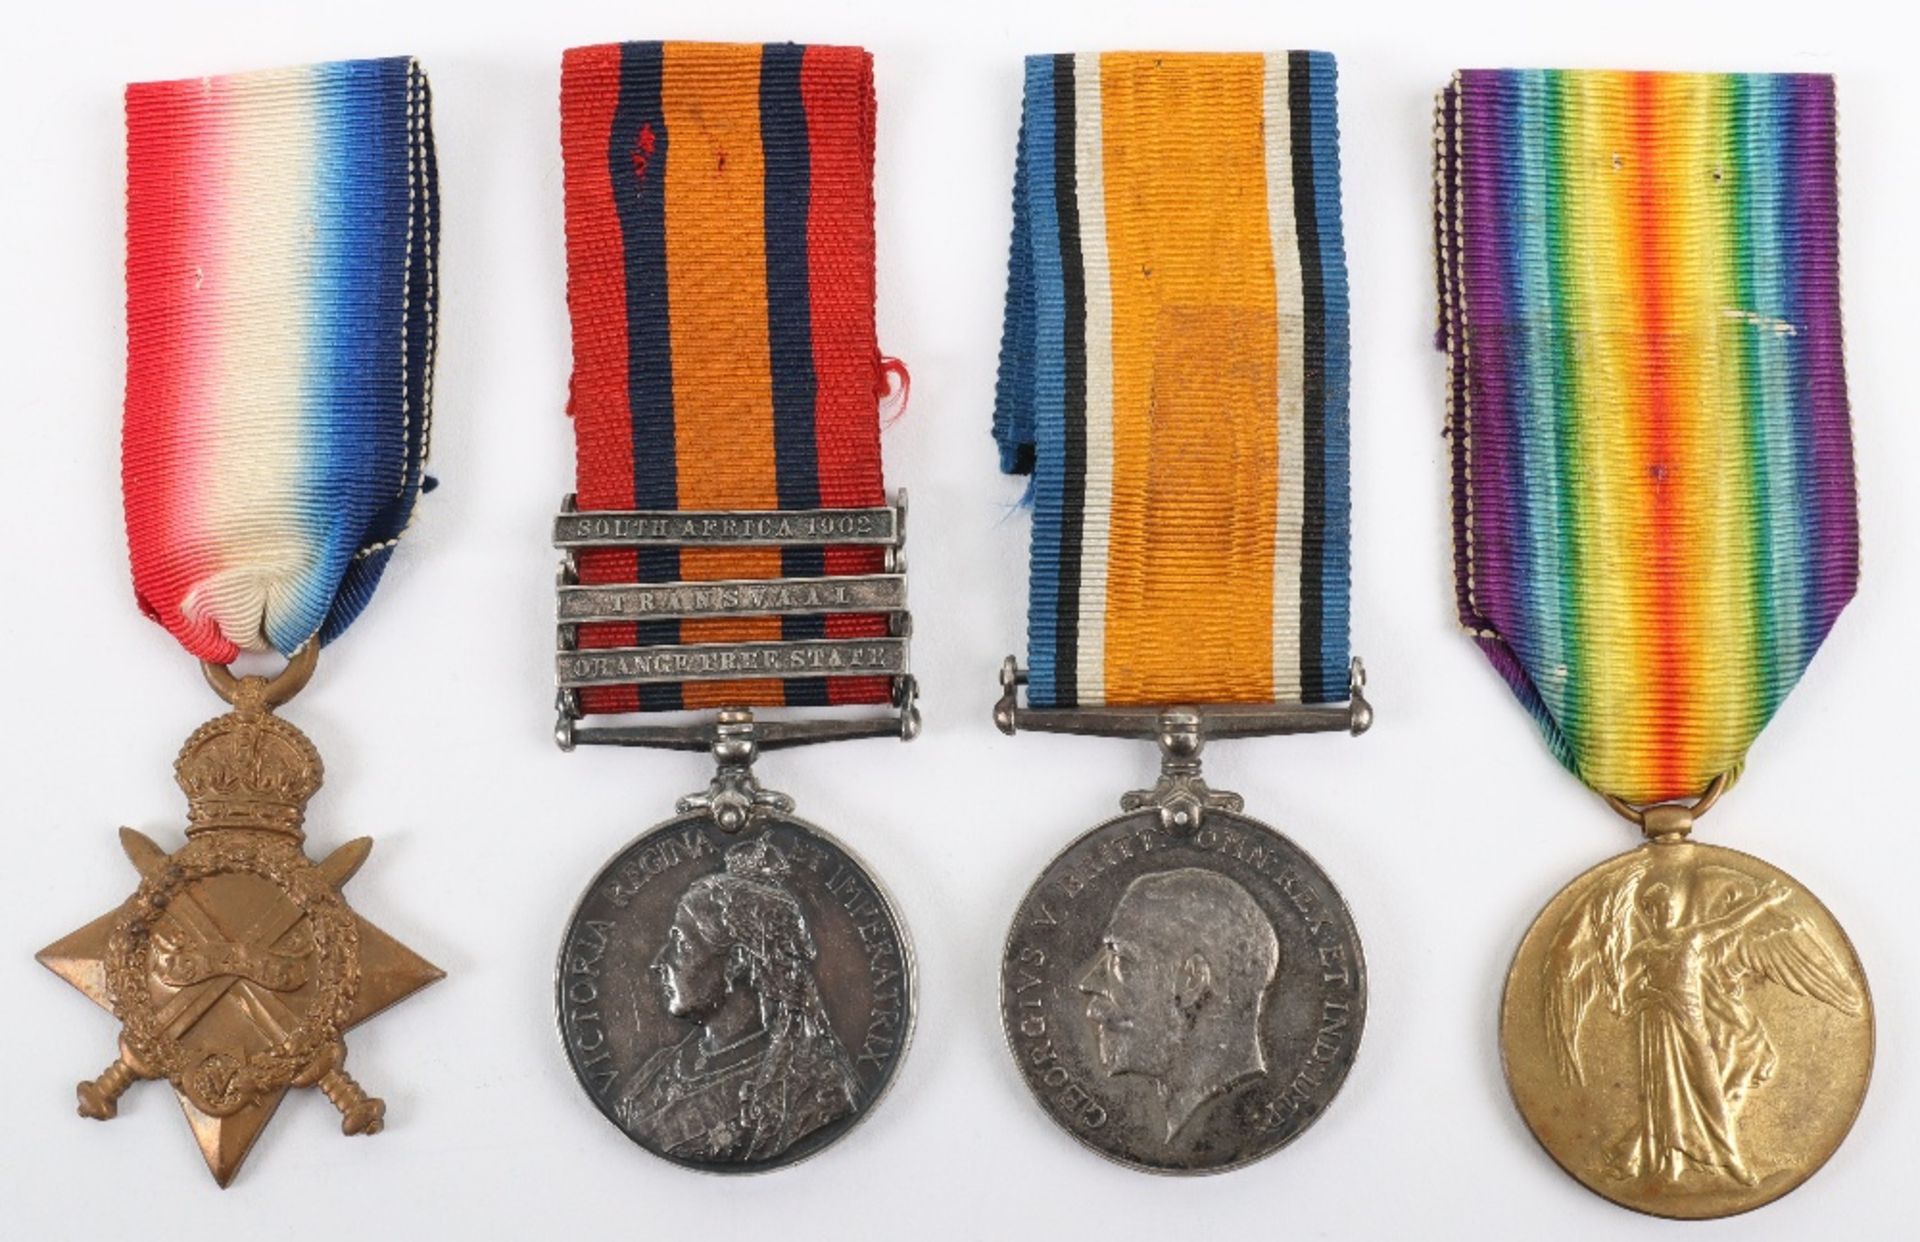 Interesting Medal Group Covering Service in Africa Through Two Major Conflicts, Inniskilling Fusilie